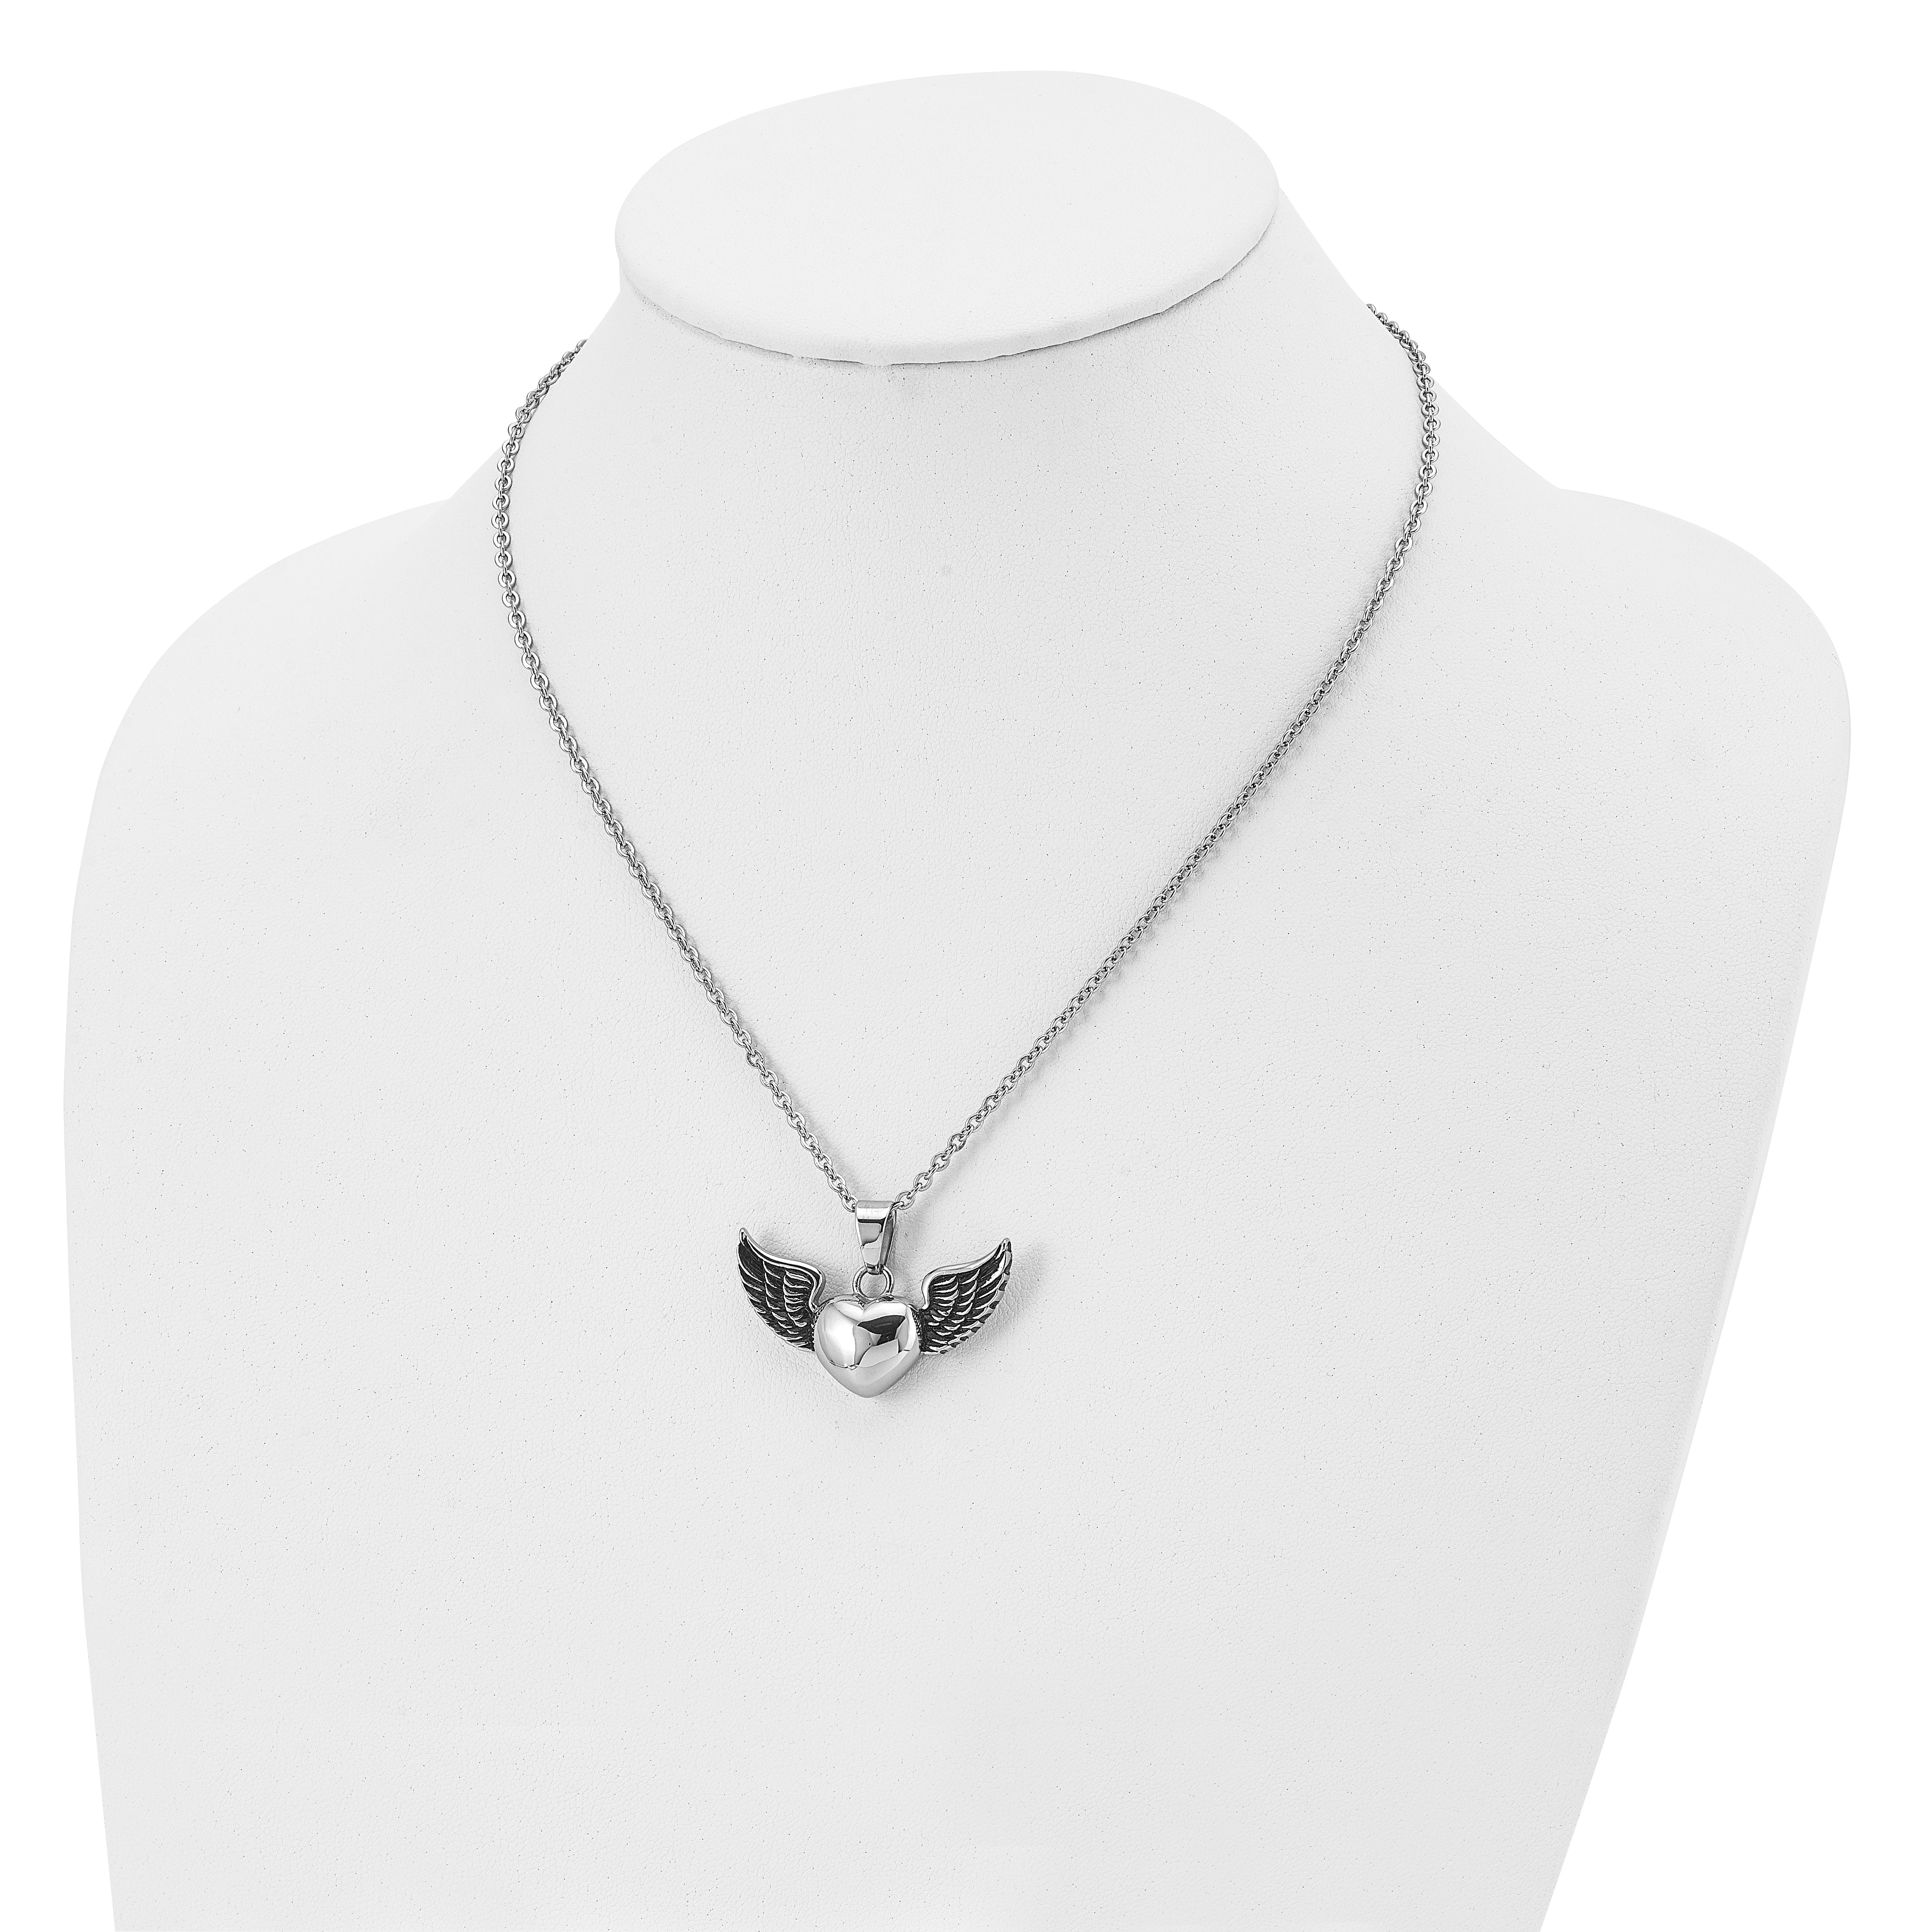 Chisel Stainless Steel Antiqued and Polished Heart with Wings Pendant on an 18 inch Cable Chain Necklace